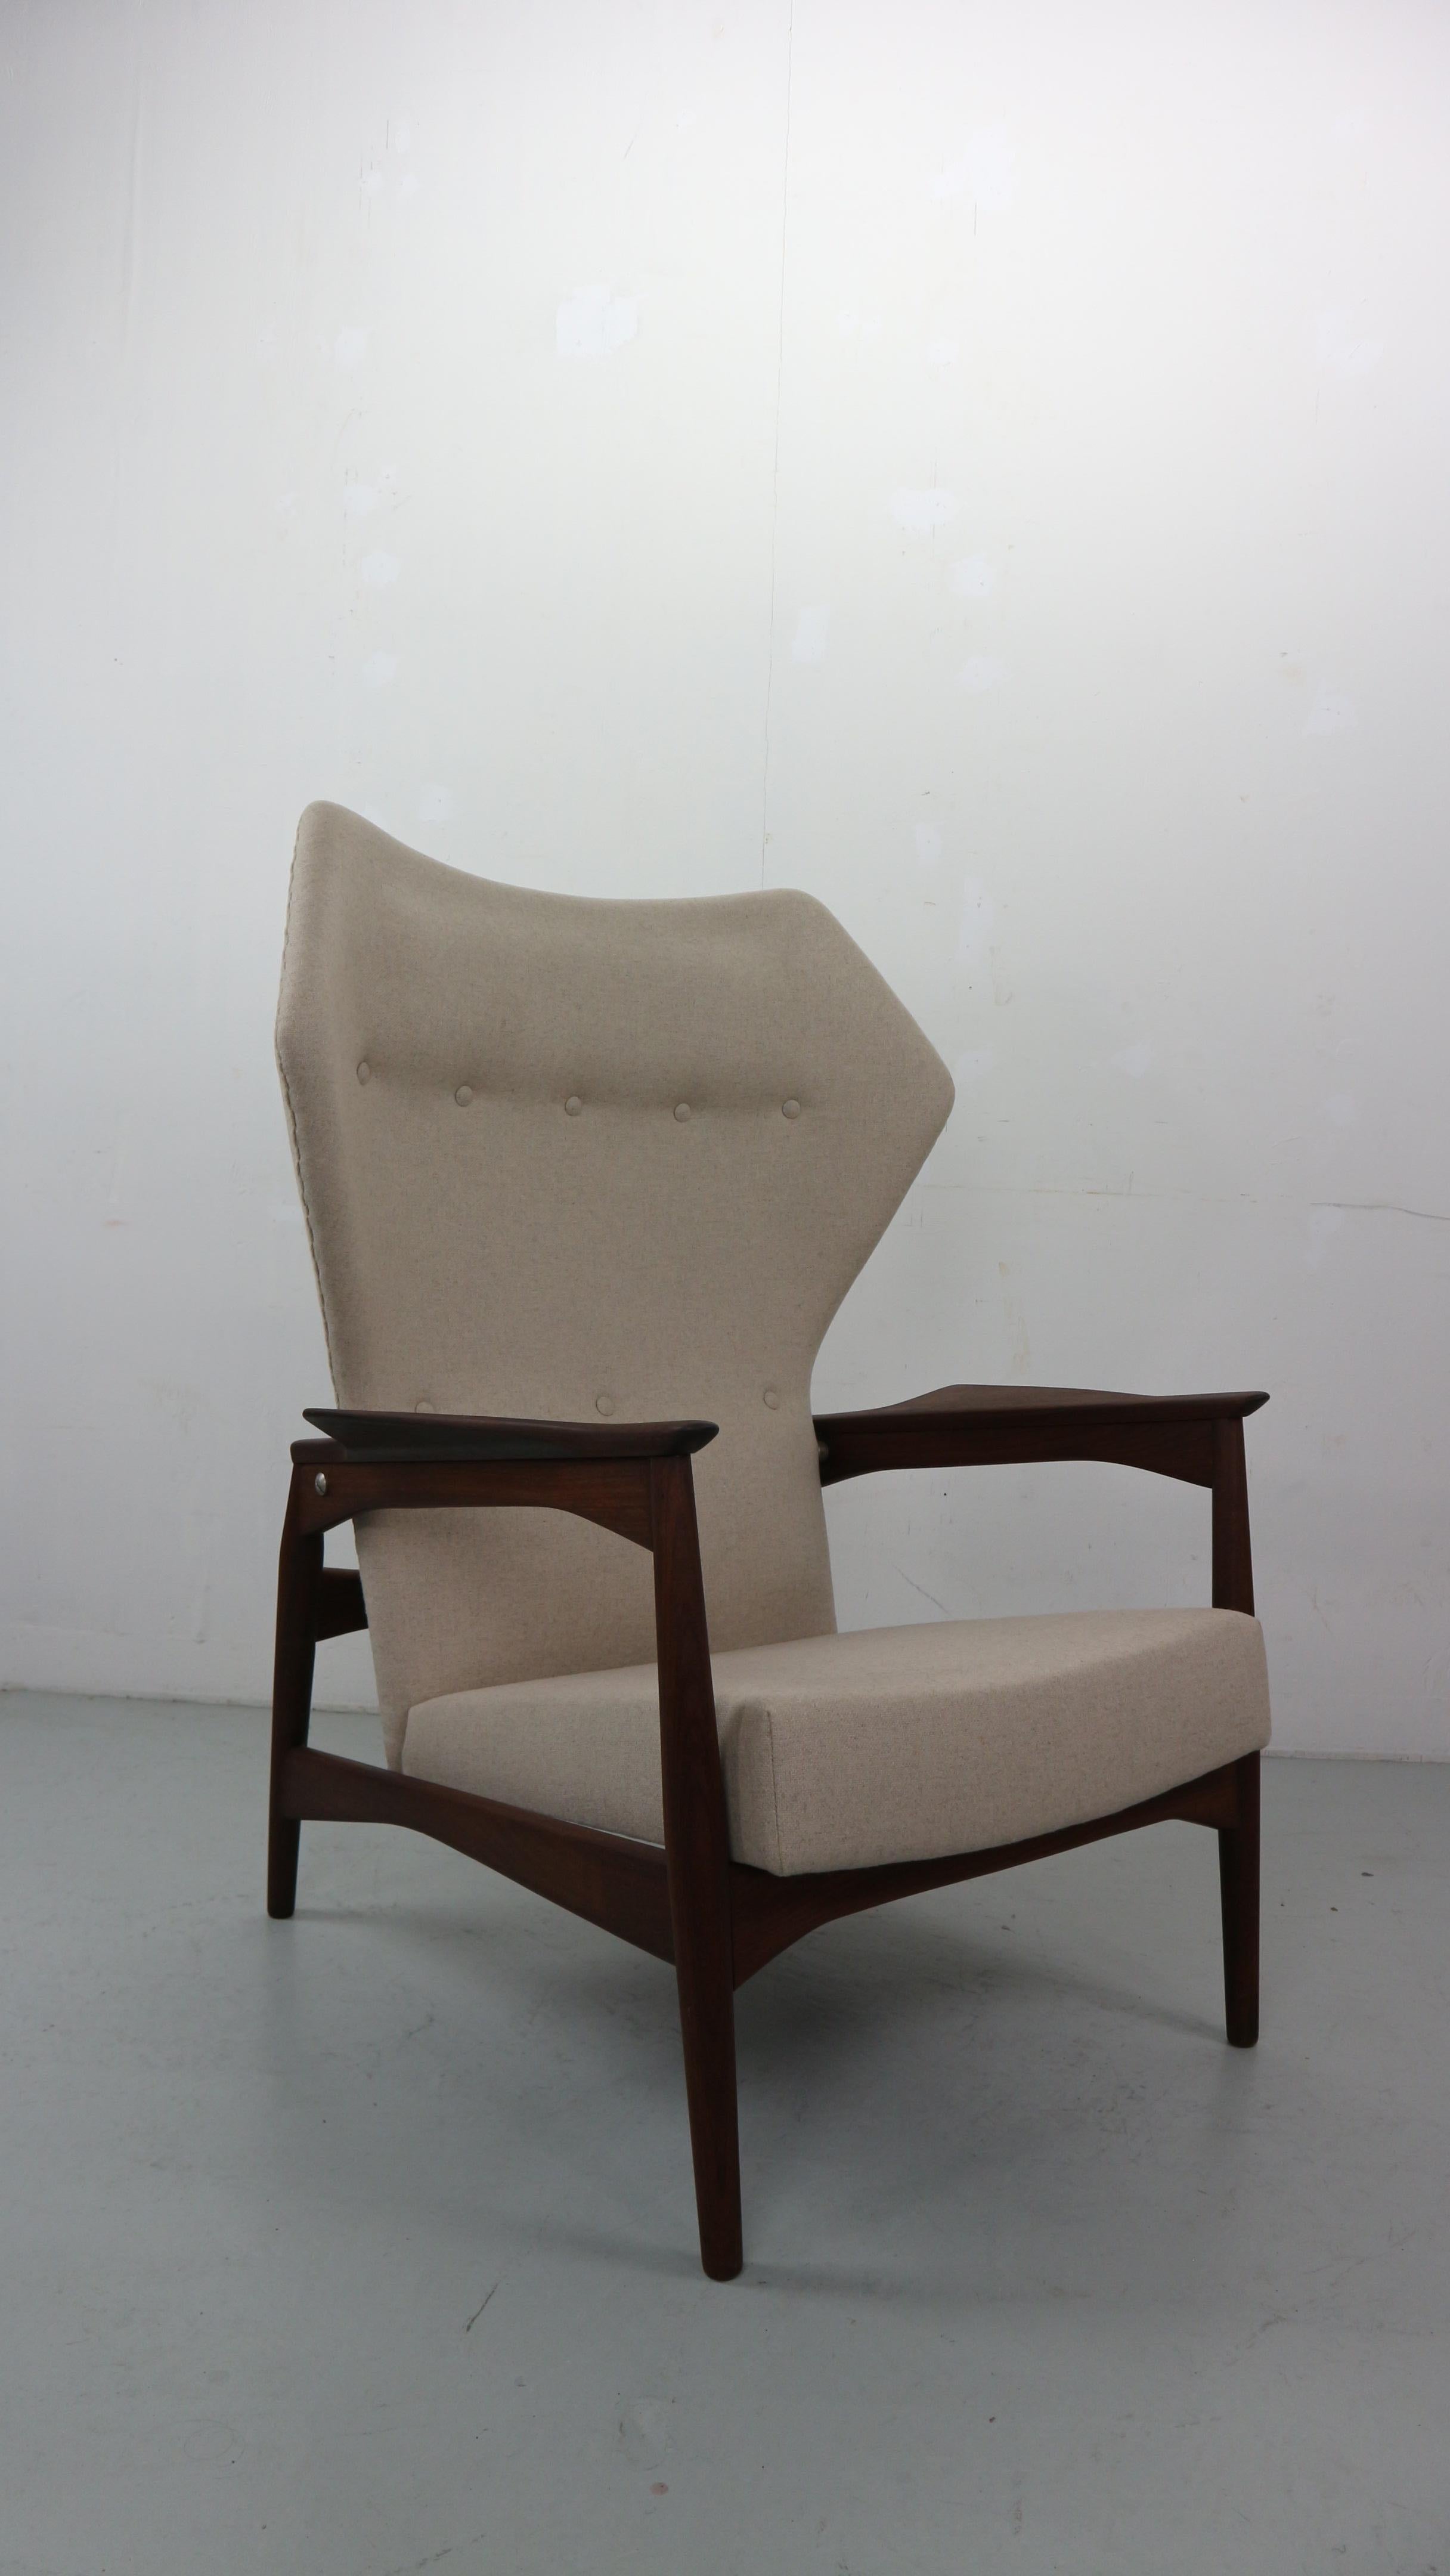 Wingback lounge chair designed by Ib Kofod-Larsen in 1954. The chair is reclinable and it can be adjusted in three positions, as seen in the pictures. The chairs have been reupholstered in a natural wool beige color, perfect combination with the